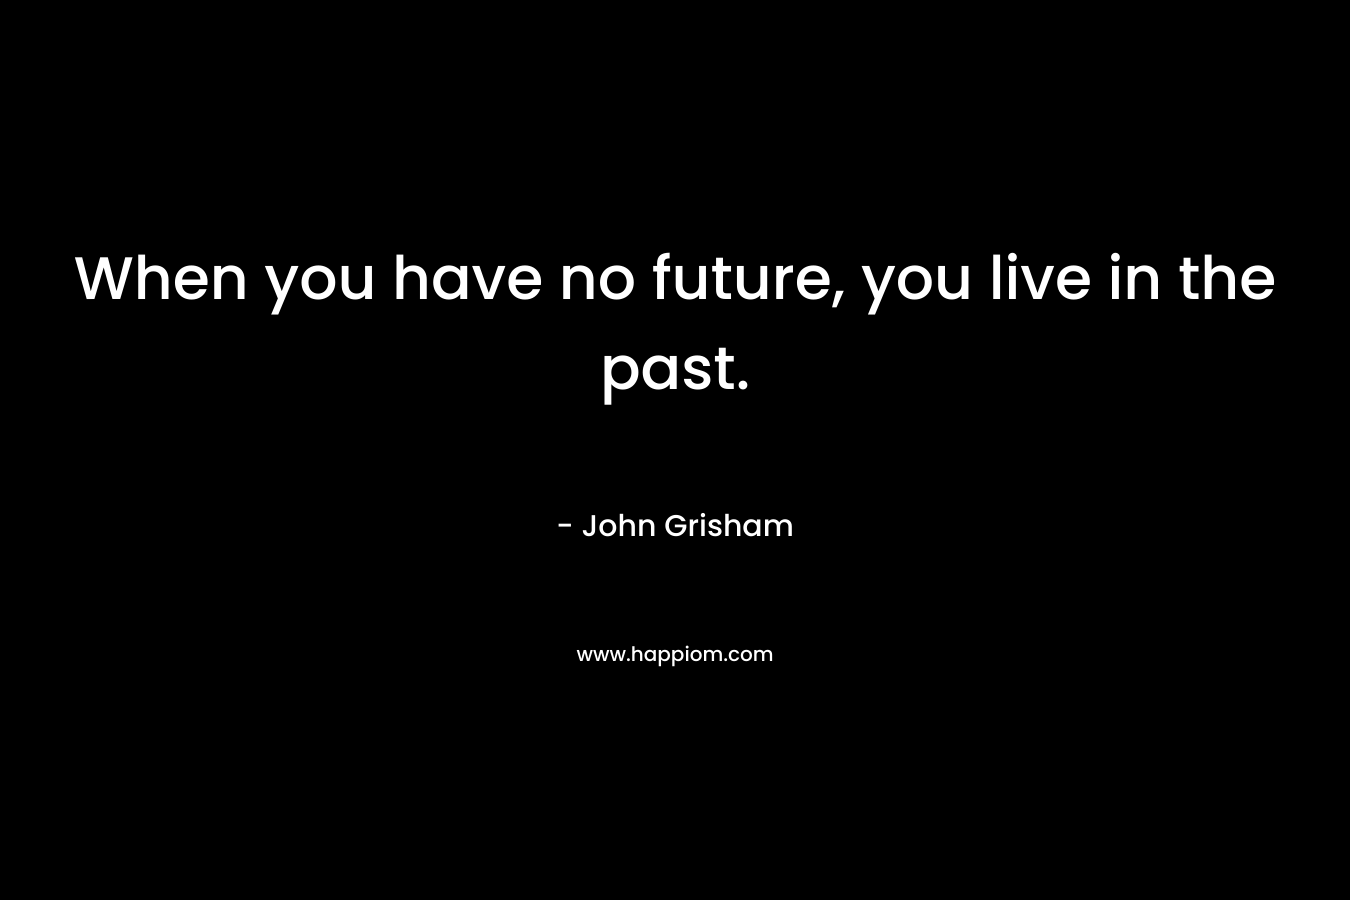 When you have no future, you live in the past.